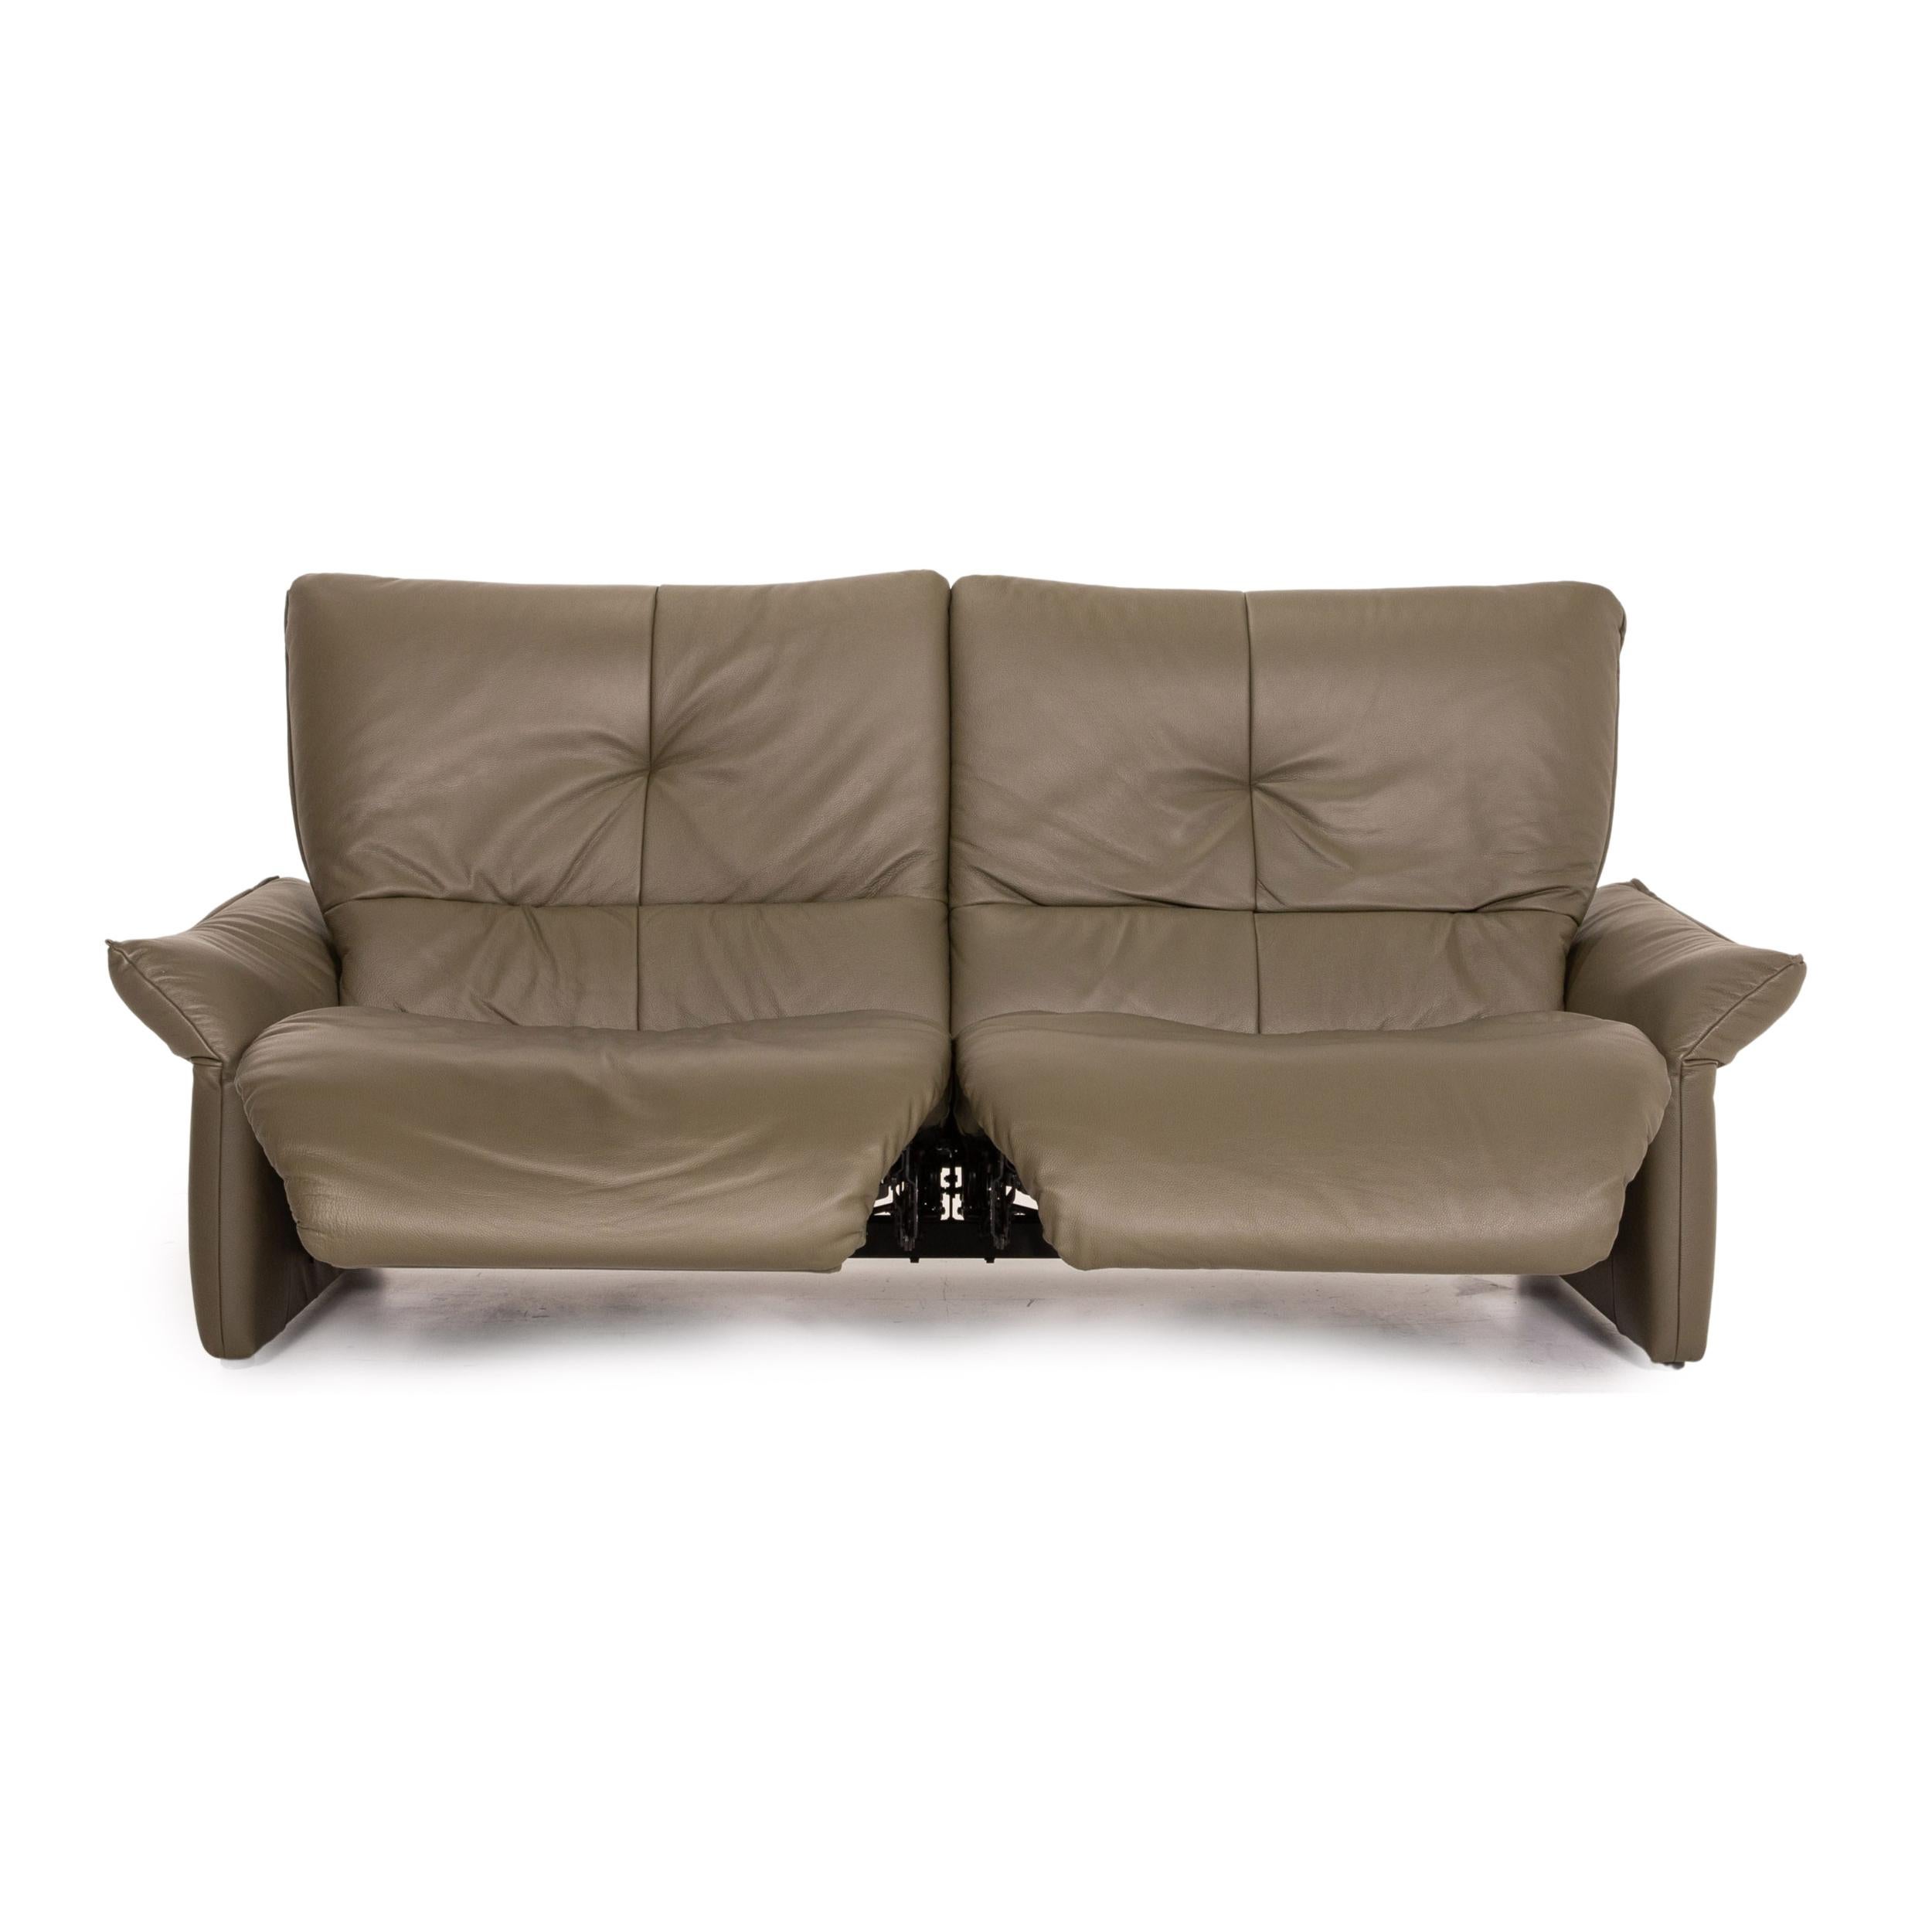 Polish Himolla Cumuly Leather Sofa Set Olive Green 1x Three-Seater 1x Two-Seater